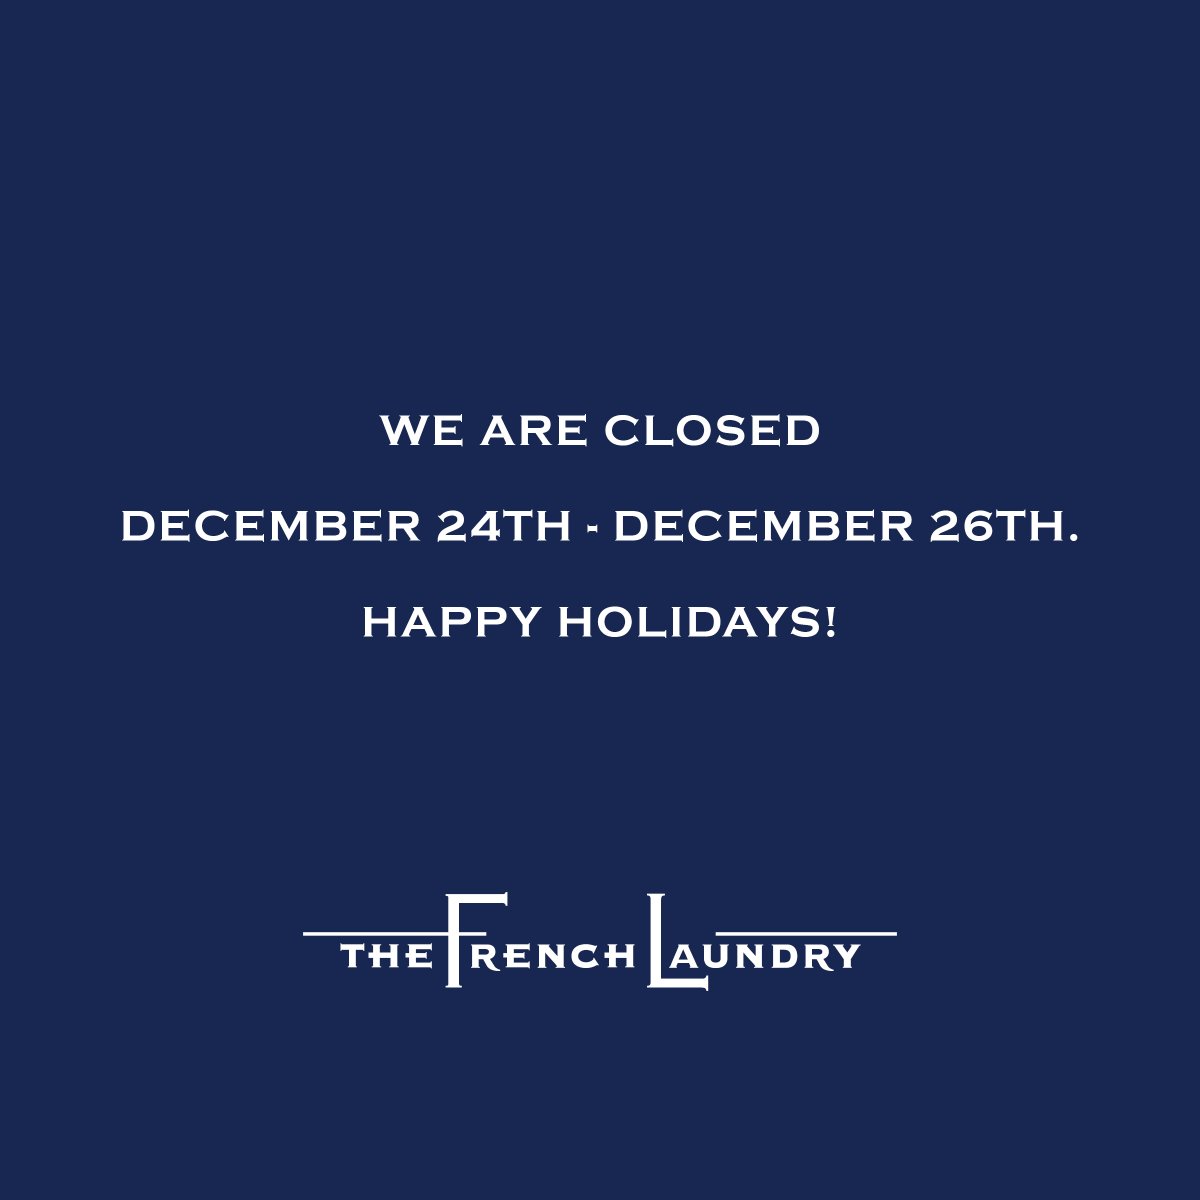 We are closed today, December 24th through December 26th, and look forward to seeing you on December 27th. Happy holidays!